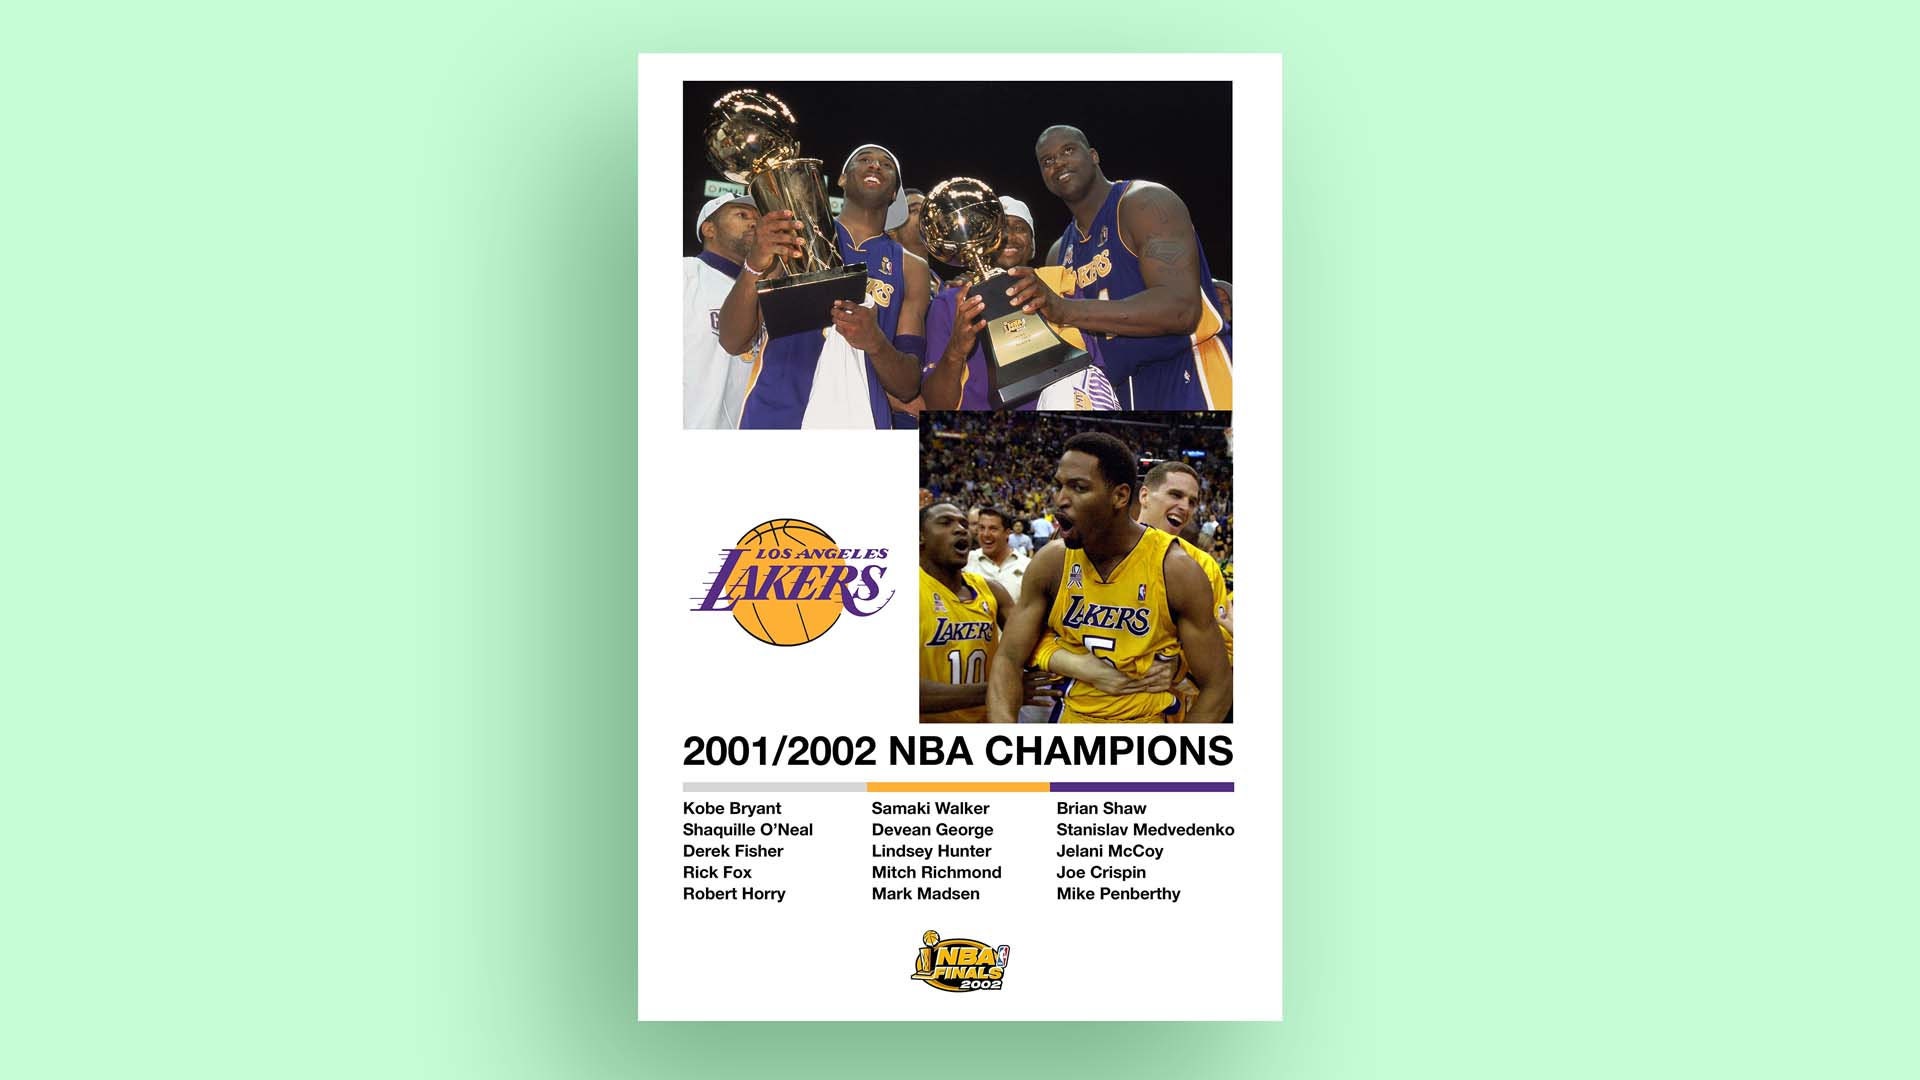 L.A. Lakers NBA Champions Poster — DKNG